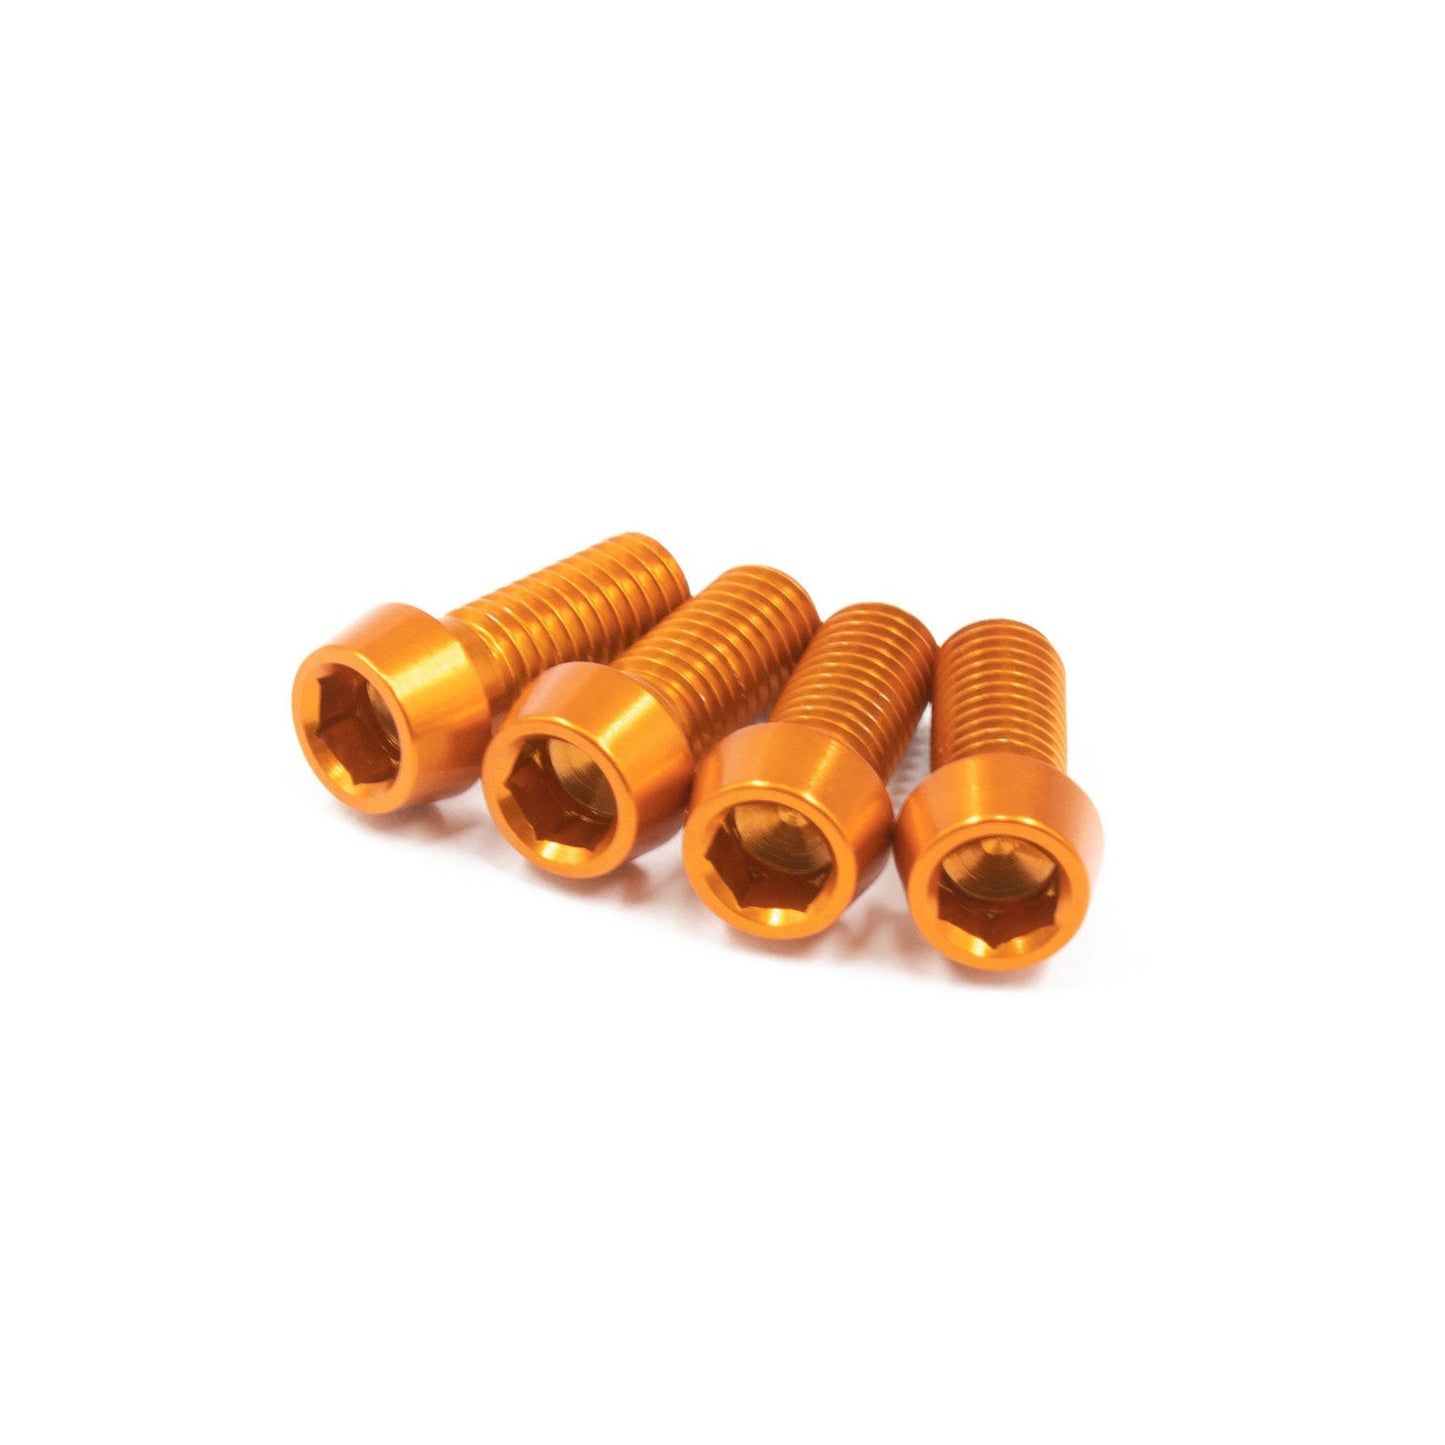 Orange, ultra lightweight set of bolts for bicycle bottle cages